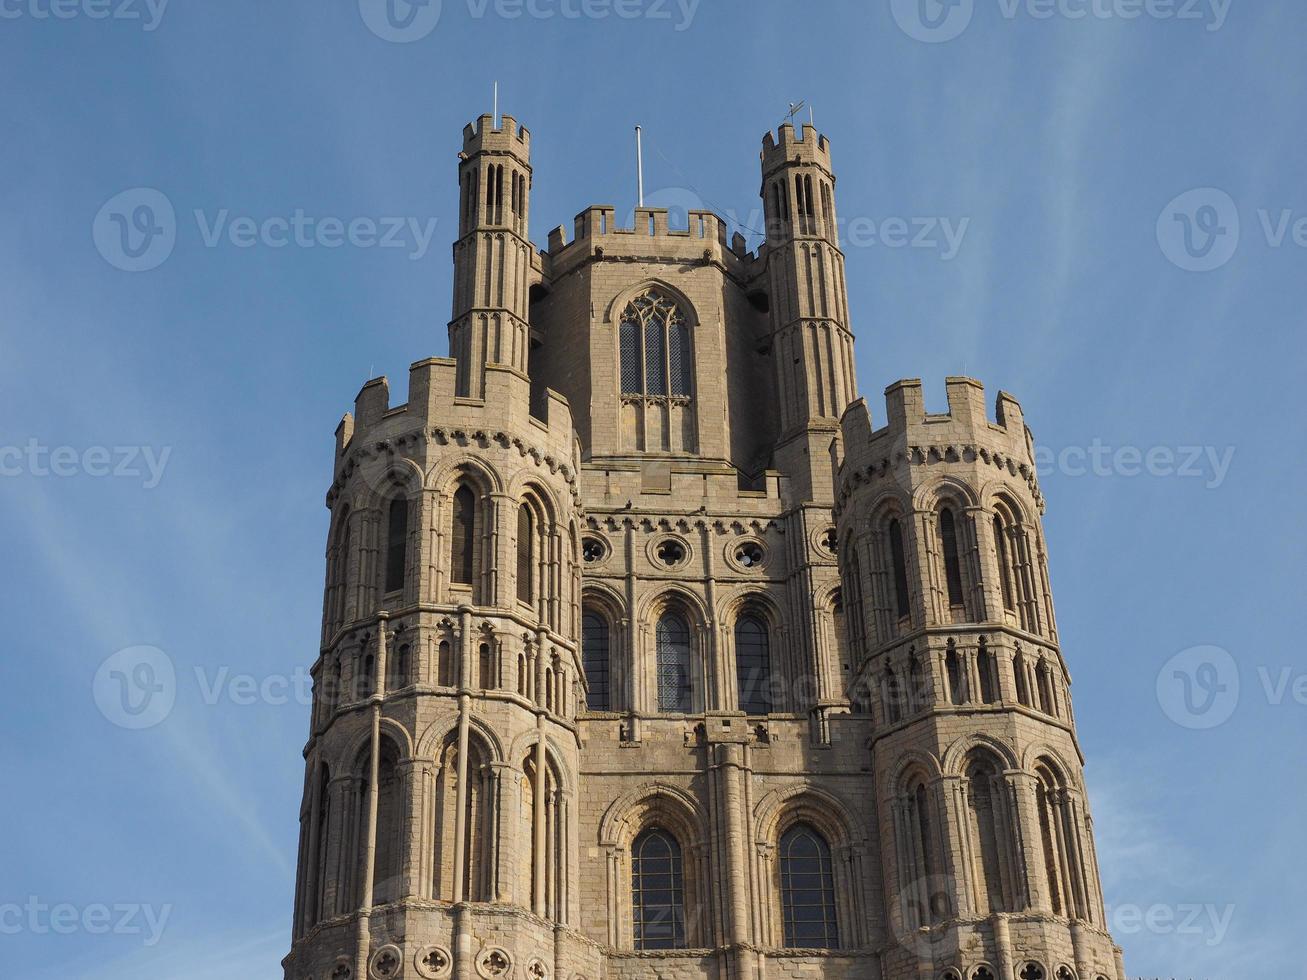 Ely Cathedral in Ely photo